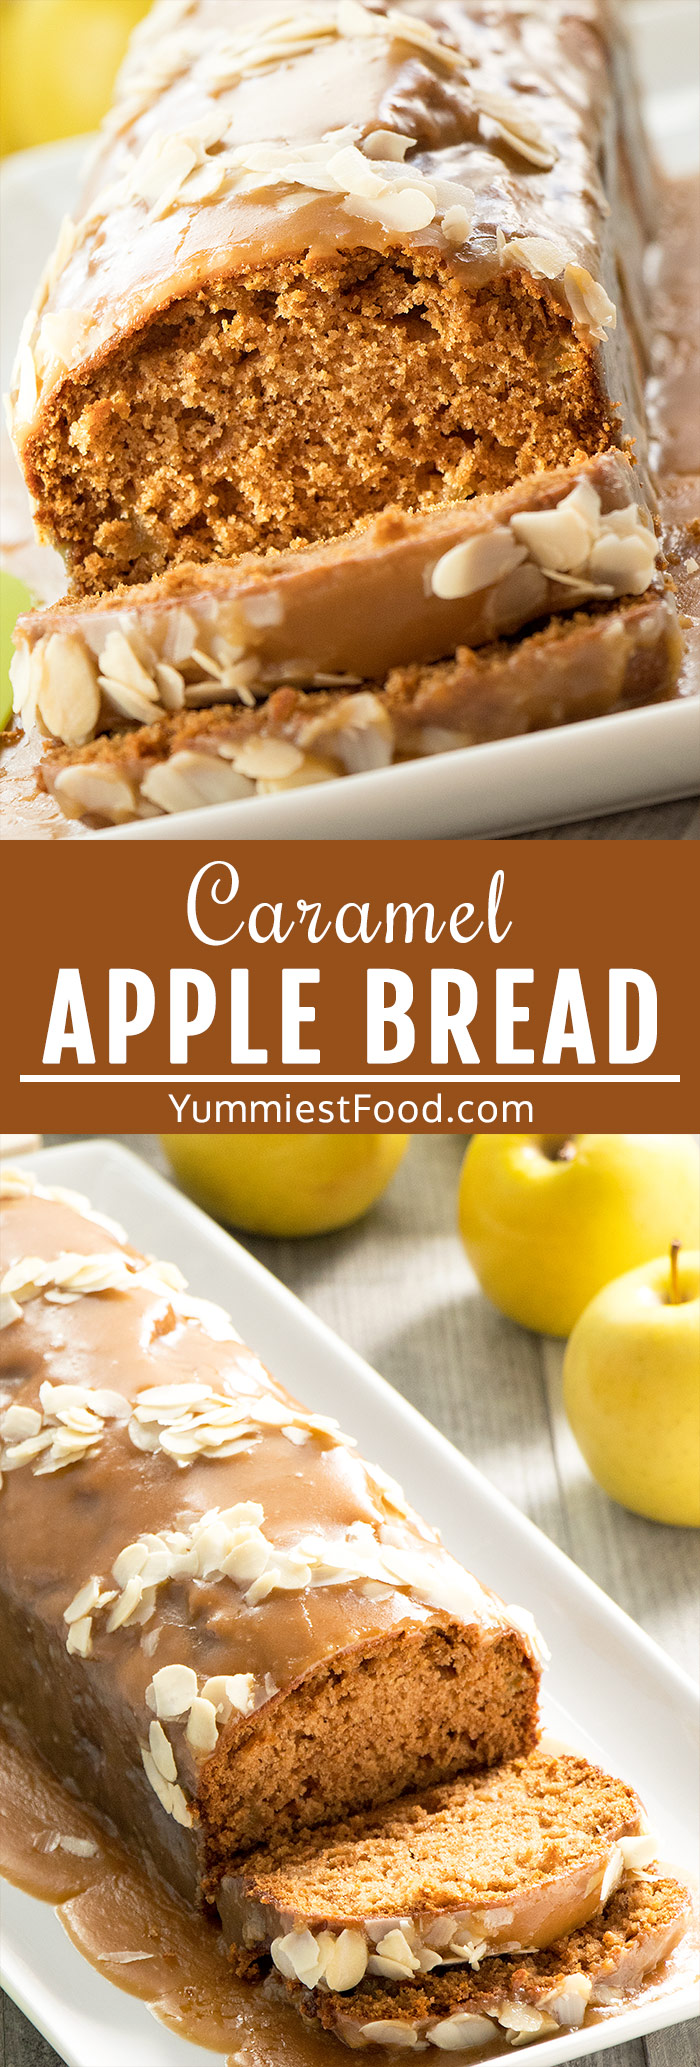 Caramel Apple Bread with Cinnamon and Nutmeg - dense and flavorful quick and easy Caramel Apple Bread topped with 3 ingredients and only 5 minutes to make caramel glaze